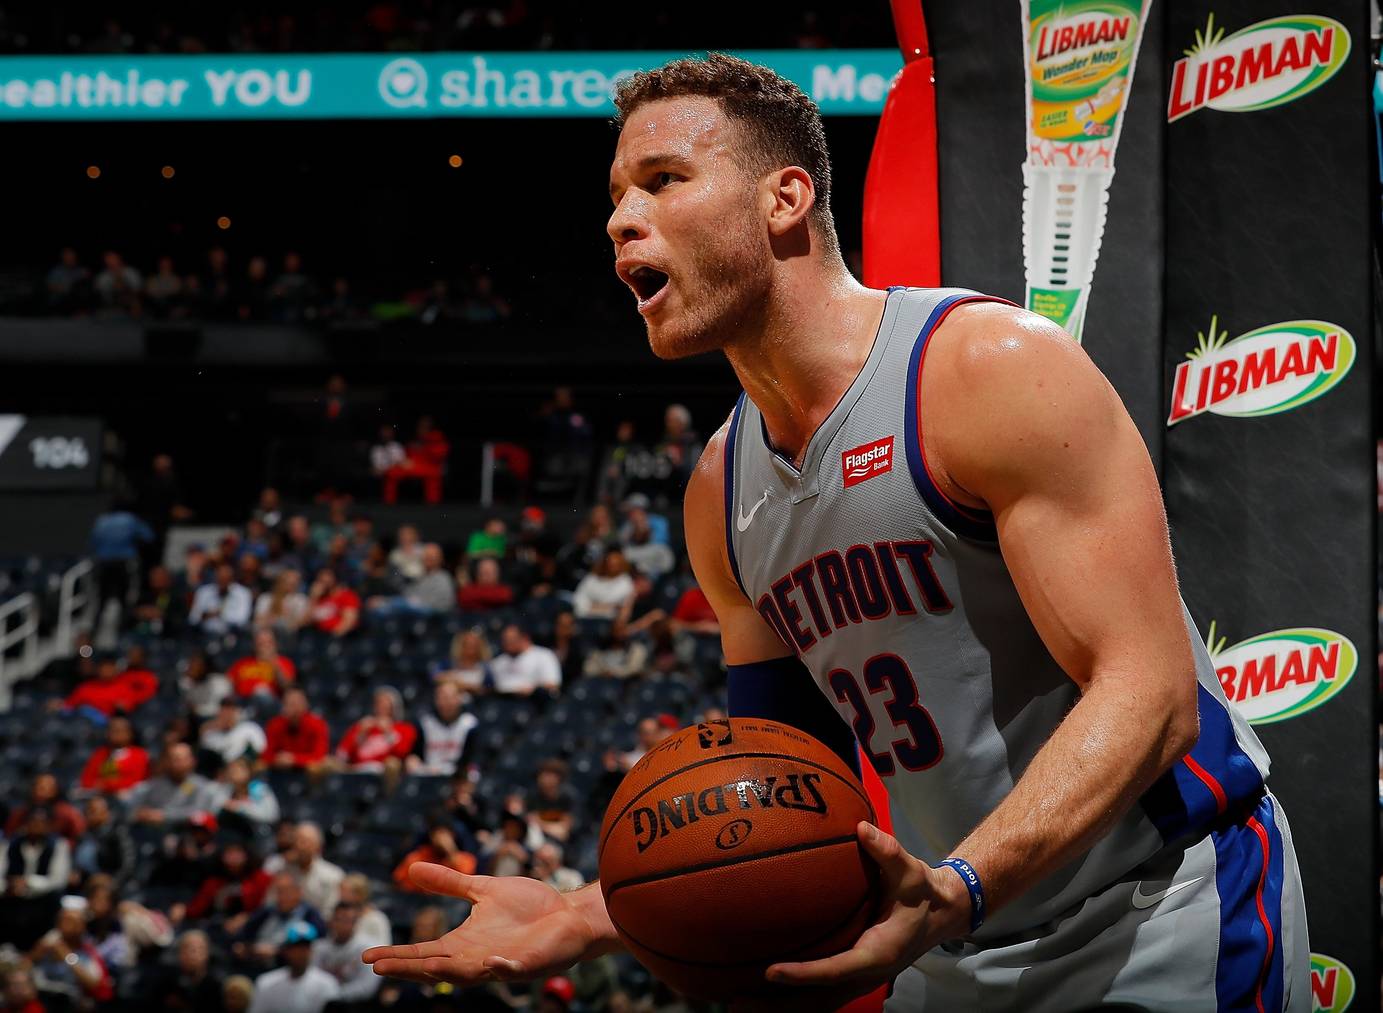 Kendall Jenners Freund Blake Griffin (Bild: Kevin C. Cox/Getty Images)